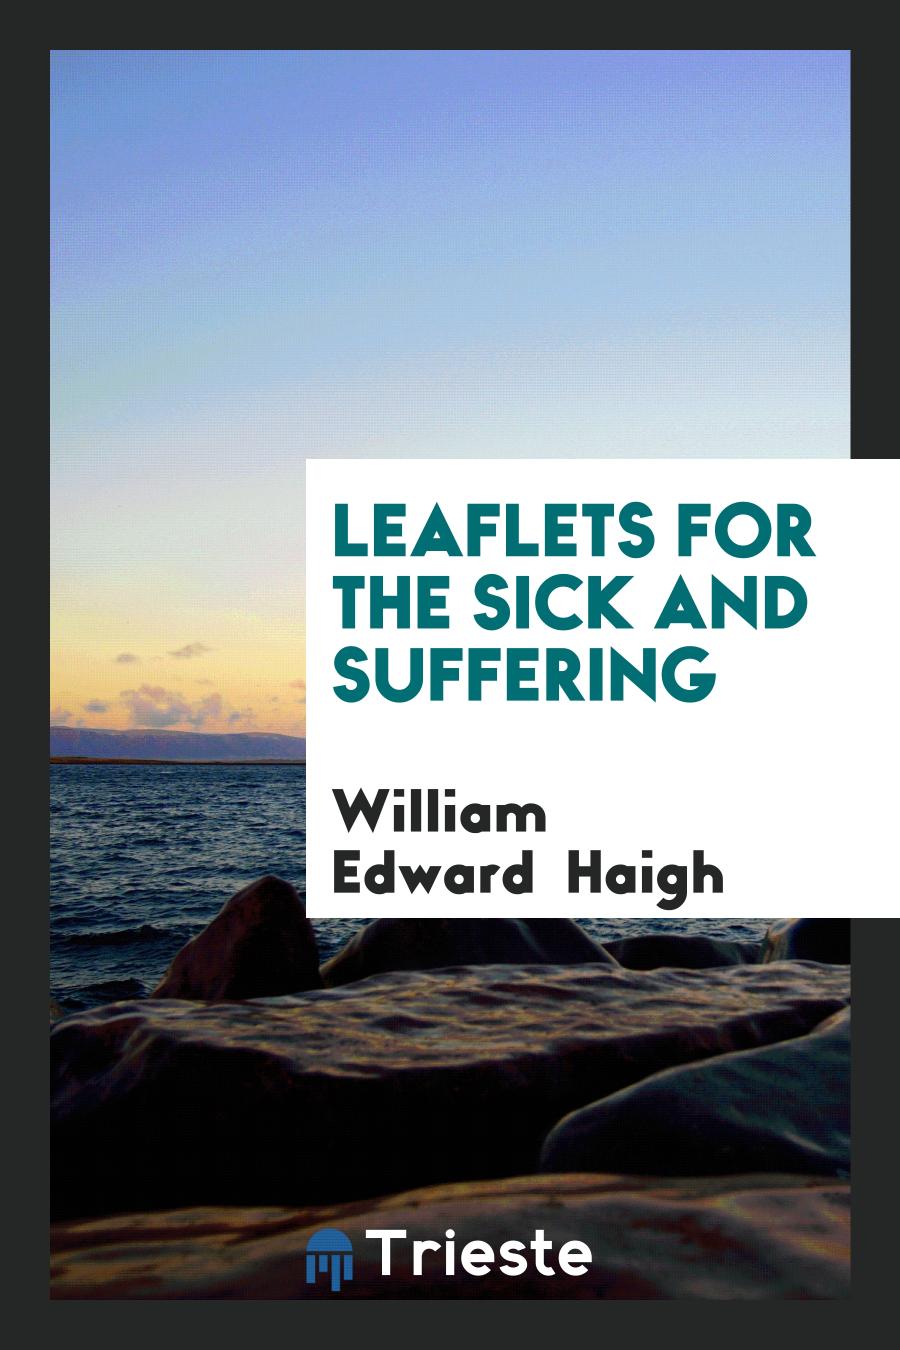 Leaflets for the sick and suffering